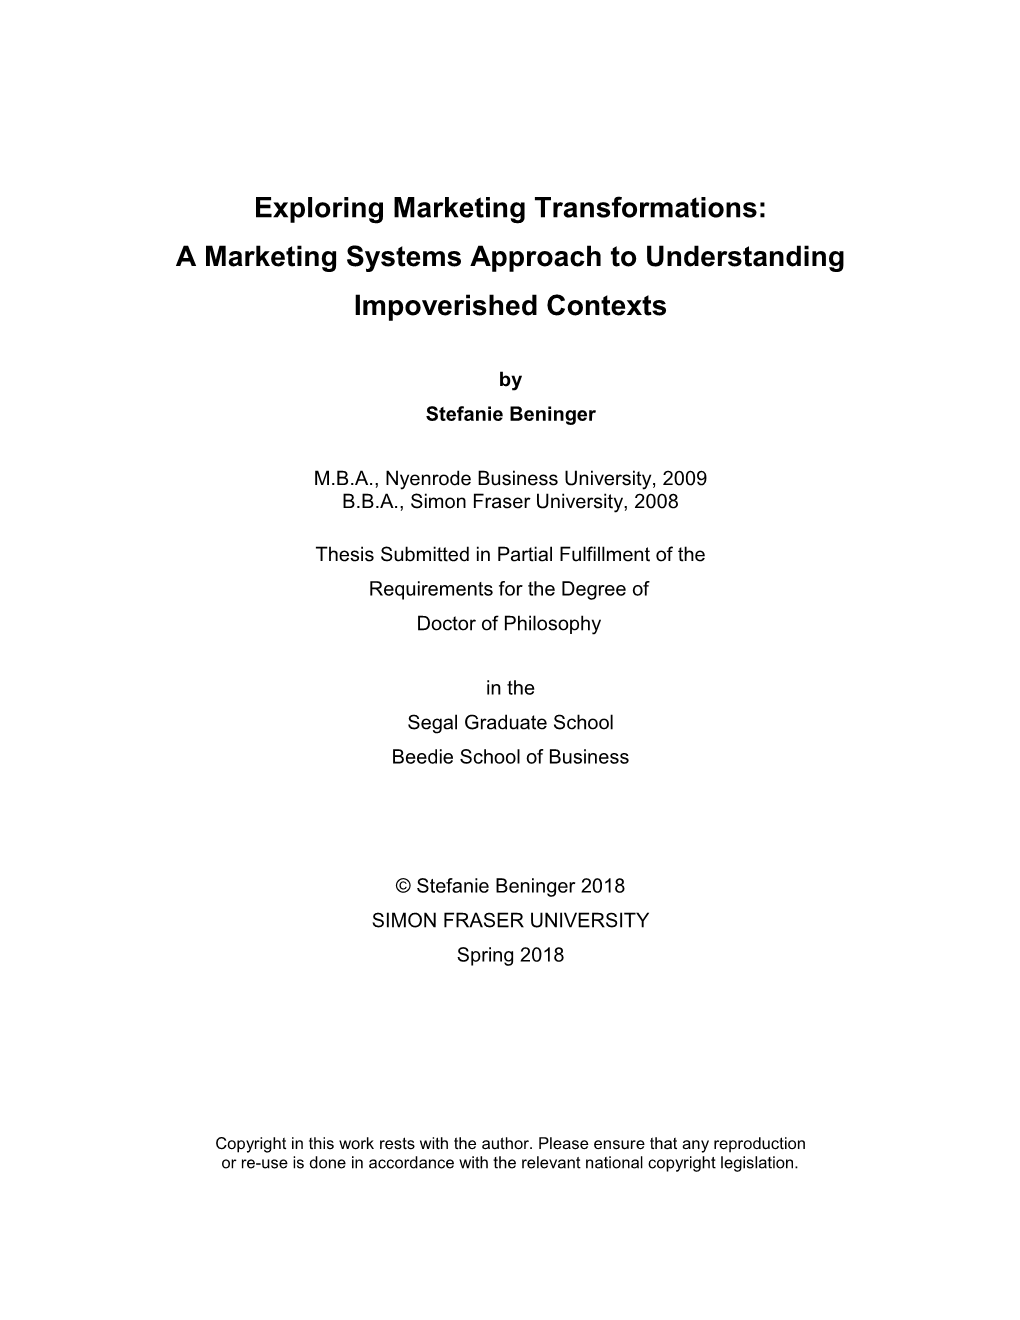 A Marketing Systems Approach to Understanding Impoverished Contexts